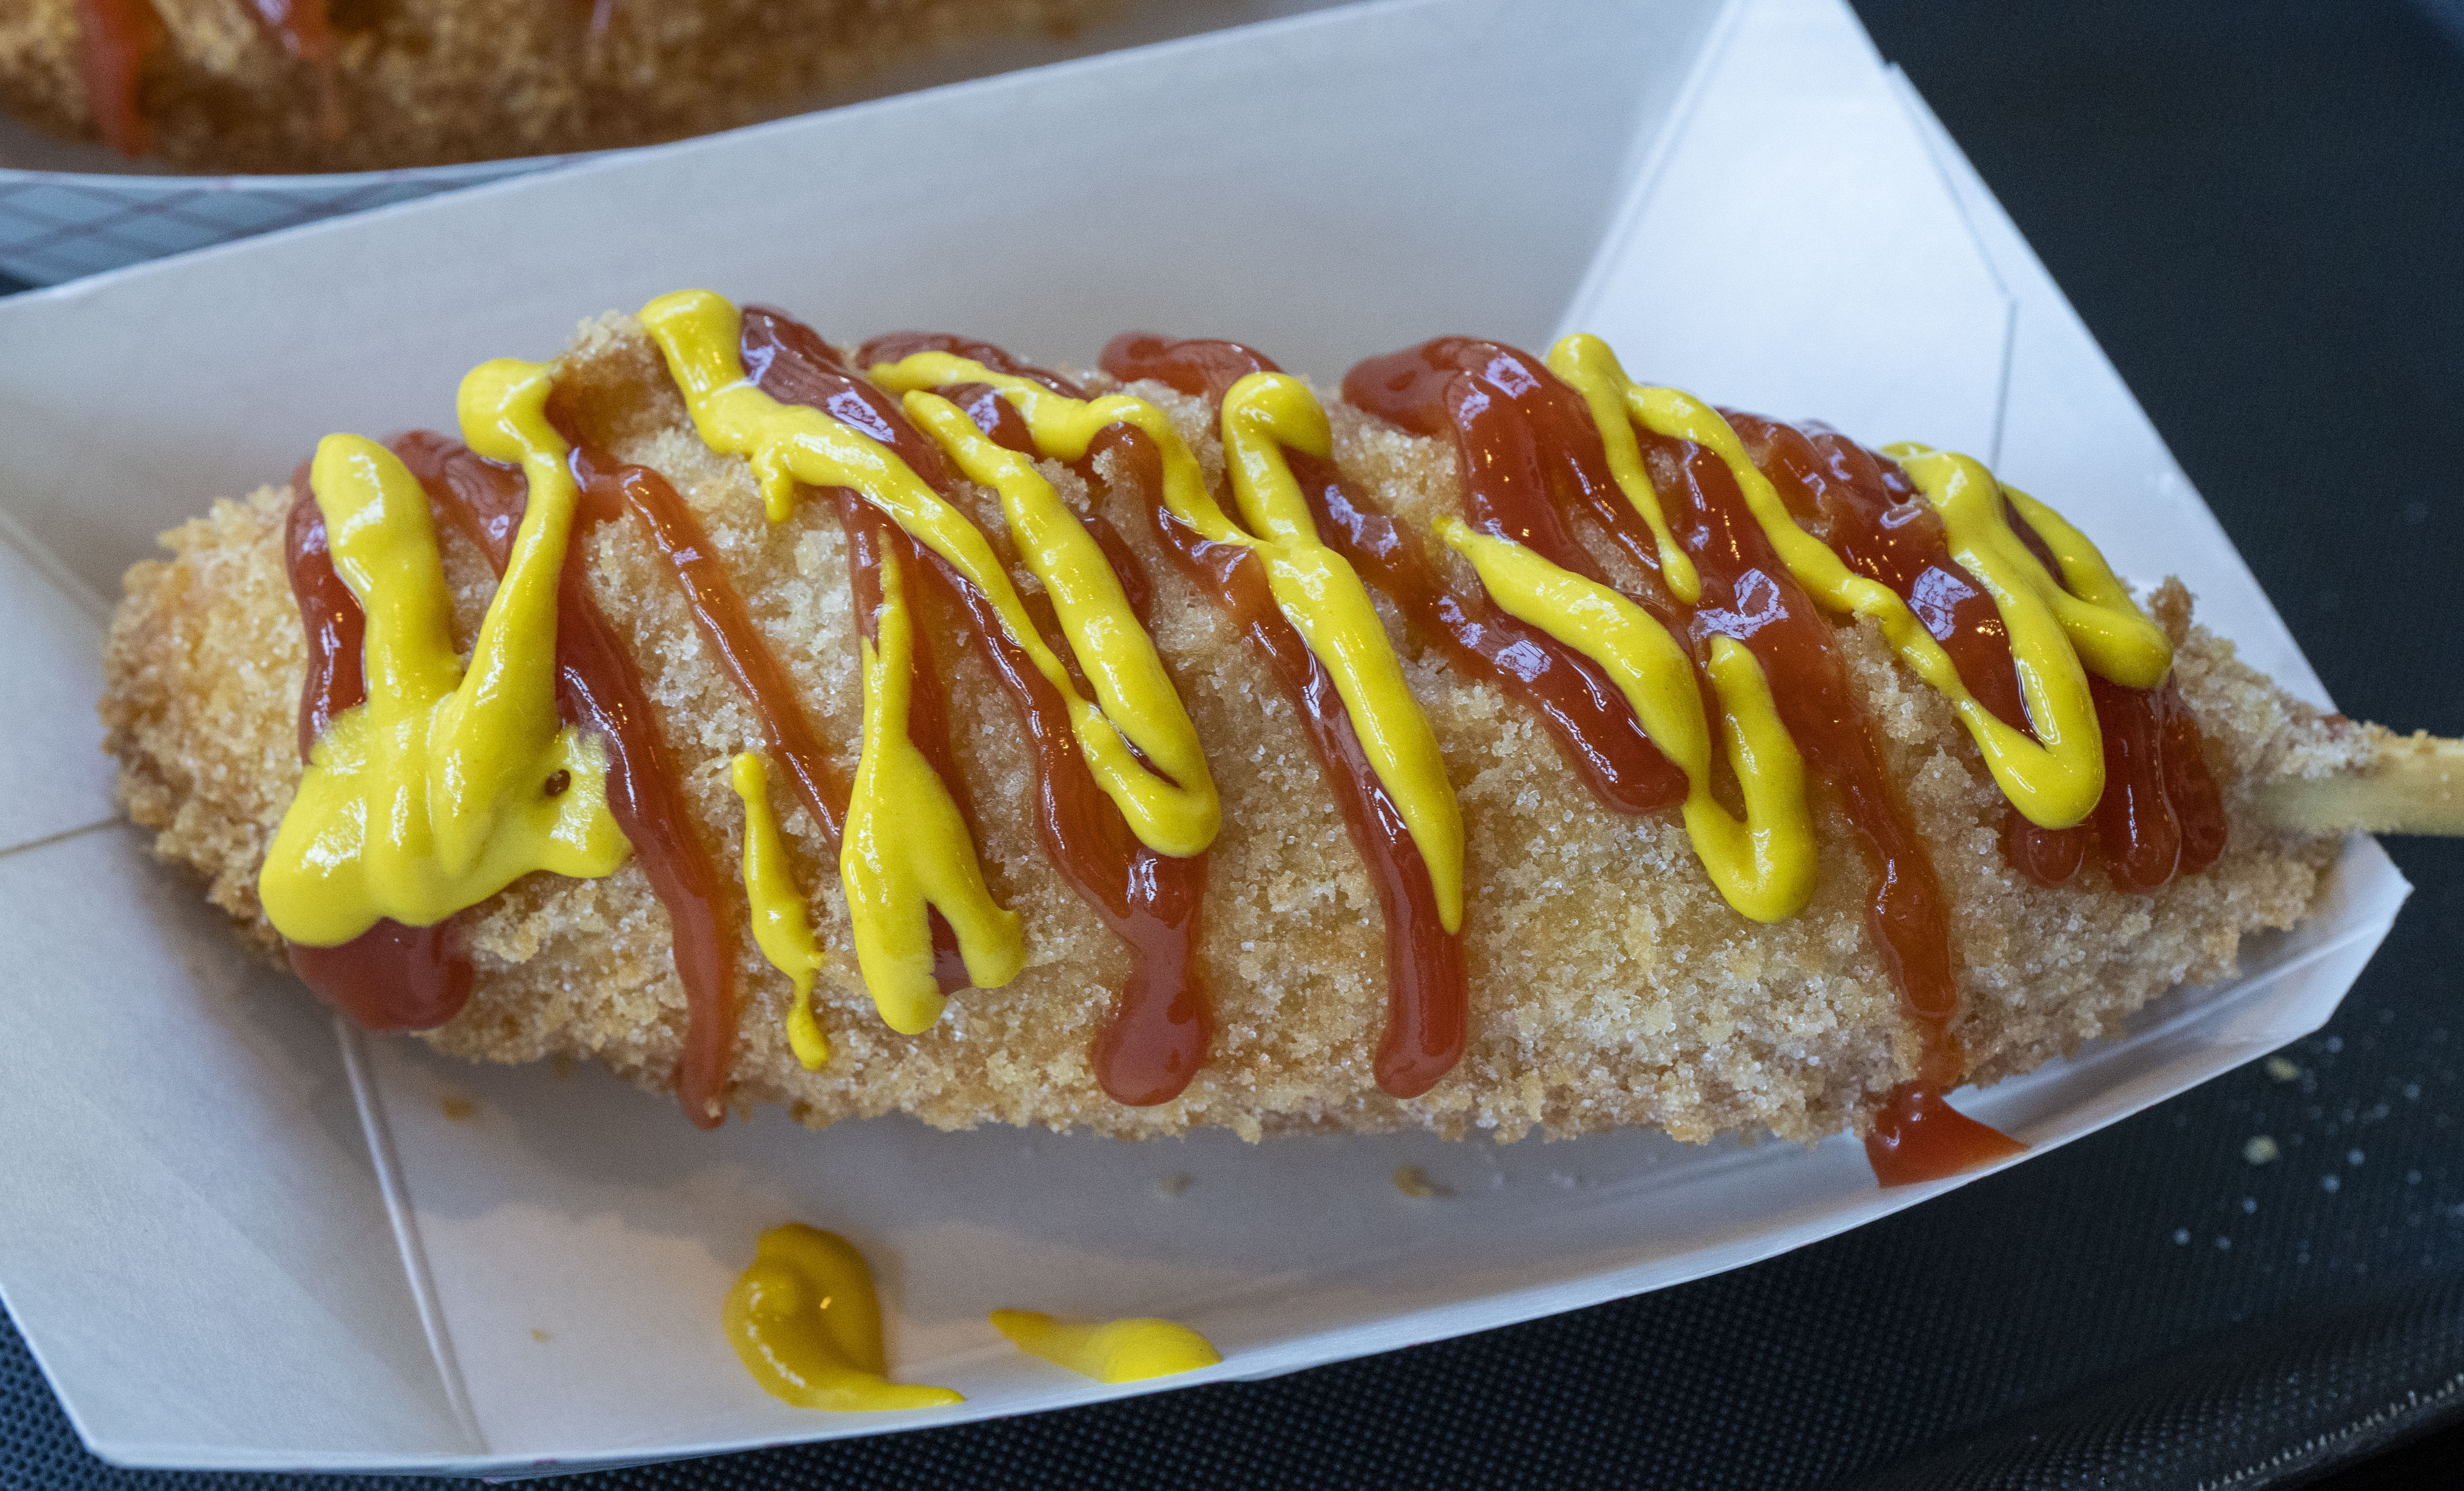 10 Places to Enjoy NYC's Can't-Miss Korean Corn Dogs